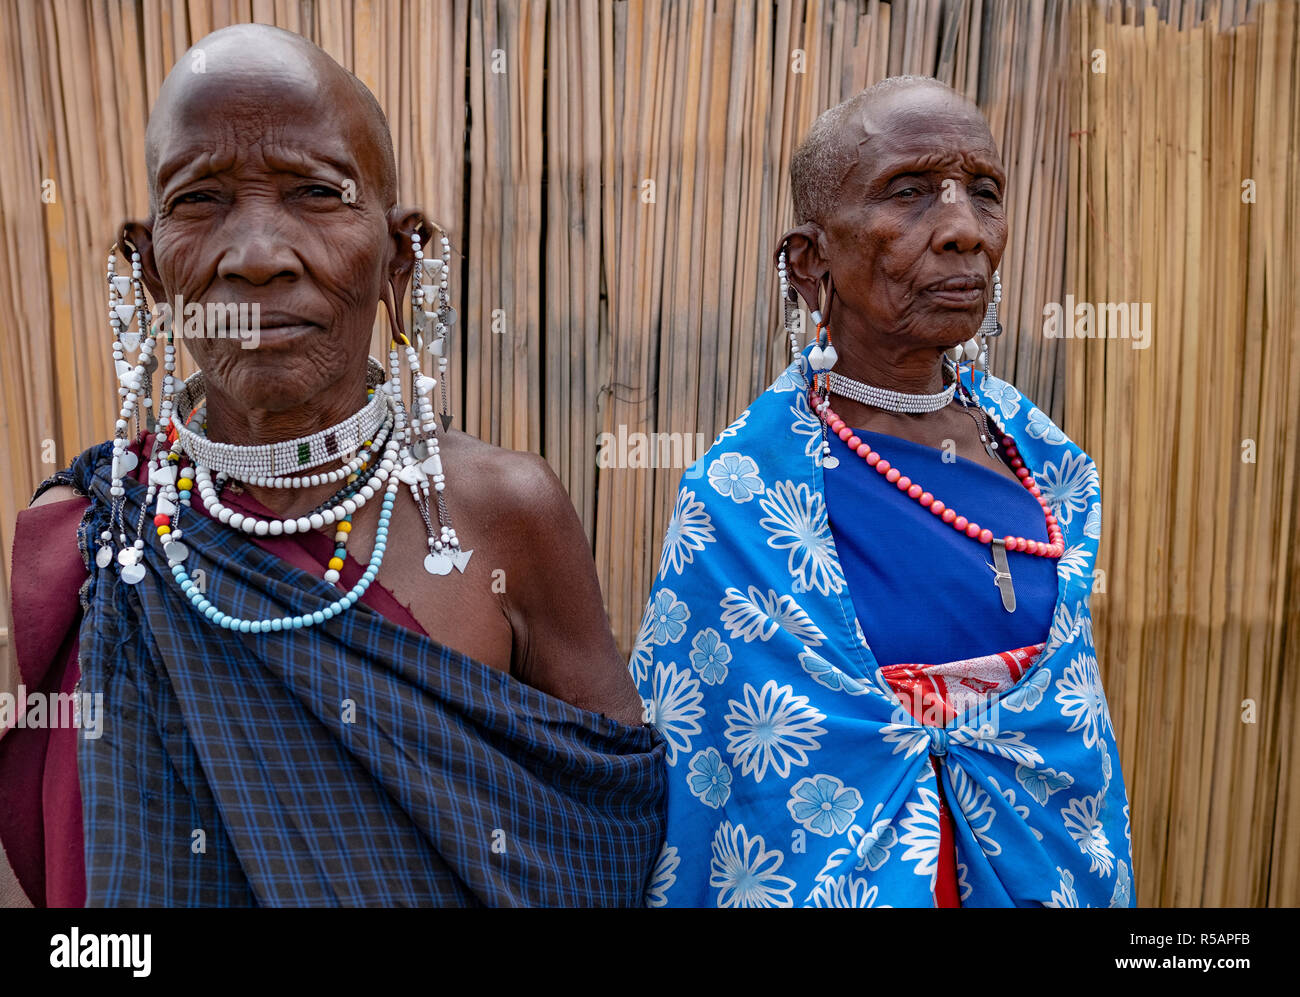 Two older Masai women in traditional dress and wearing traditional jewelry  including earrings and necklaces Stock Photo - Alamy